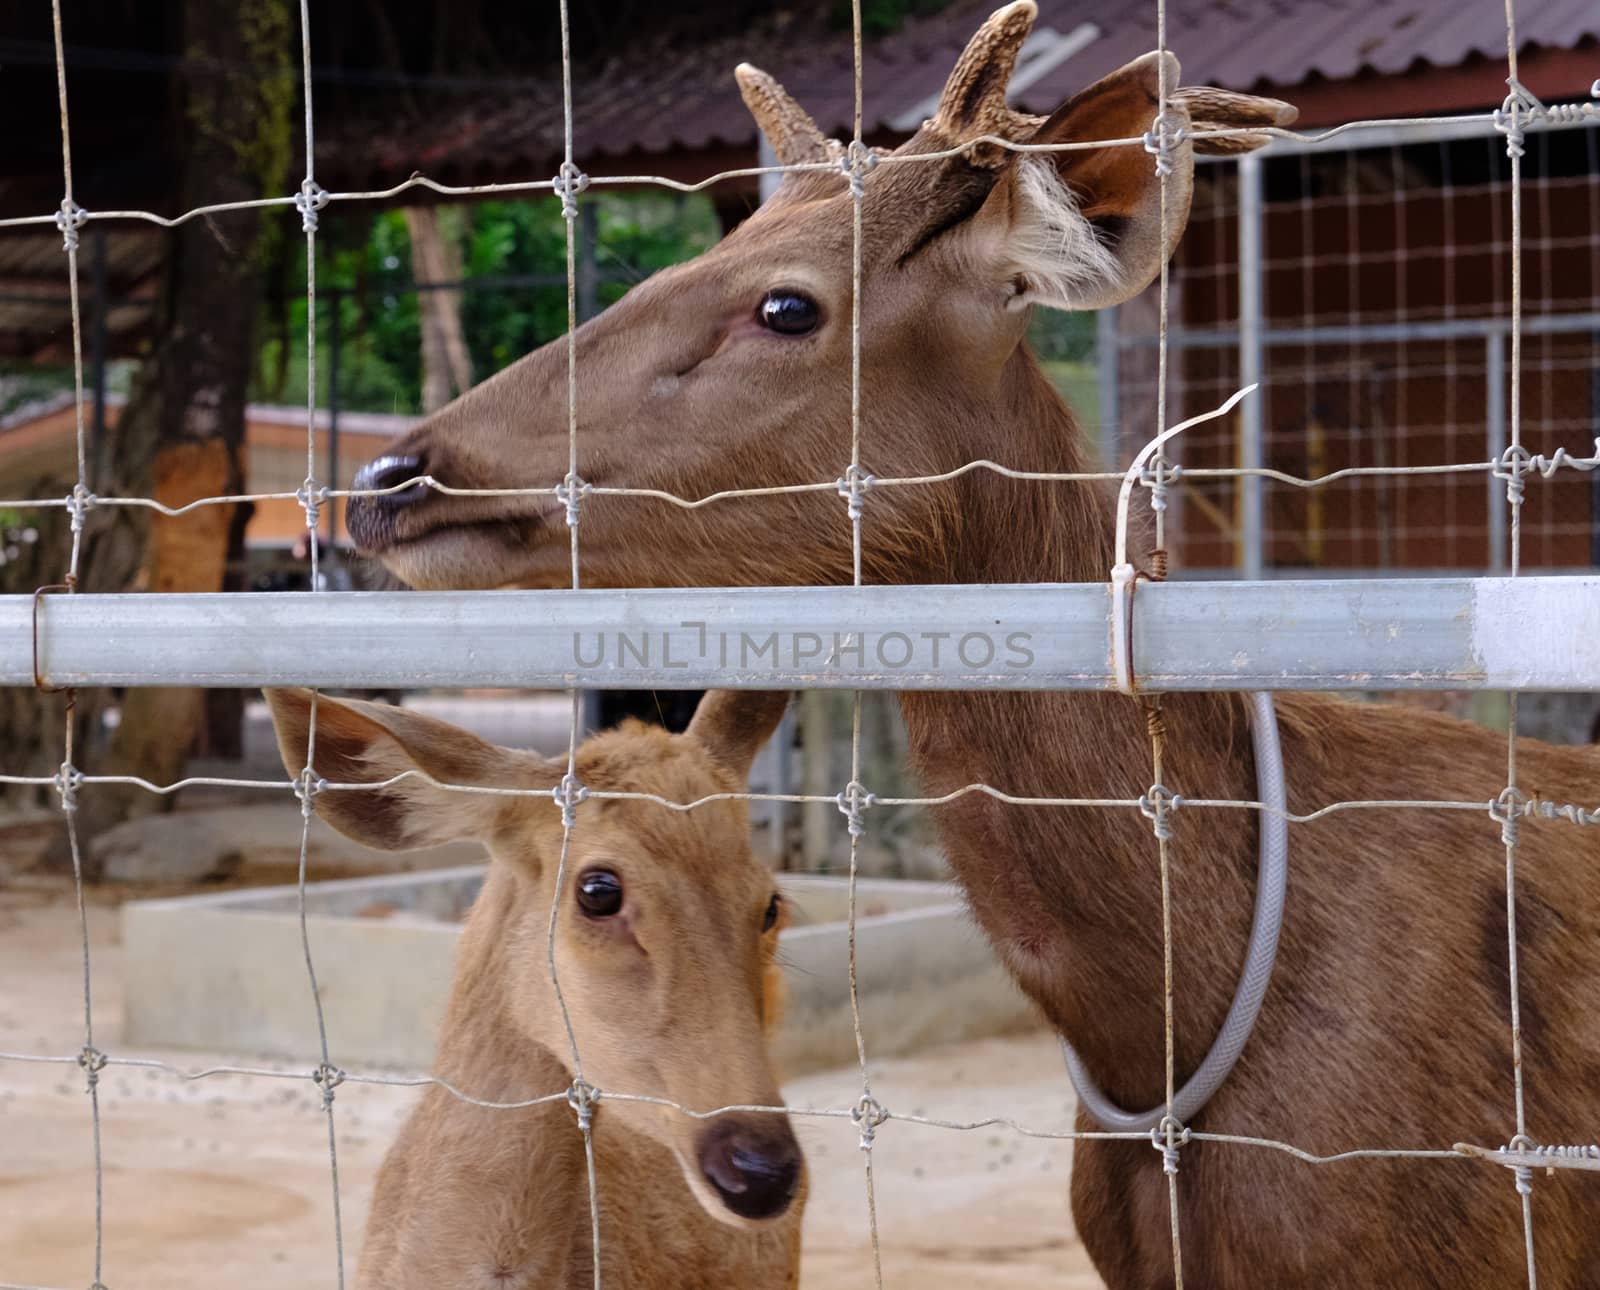 CloseUp of deer with looking sad eyes behind a wire fence. Life in captivity concept. 